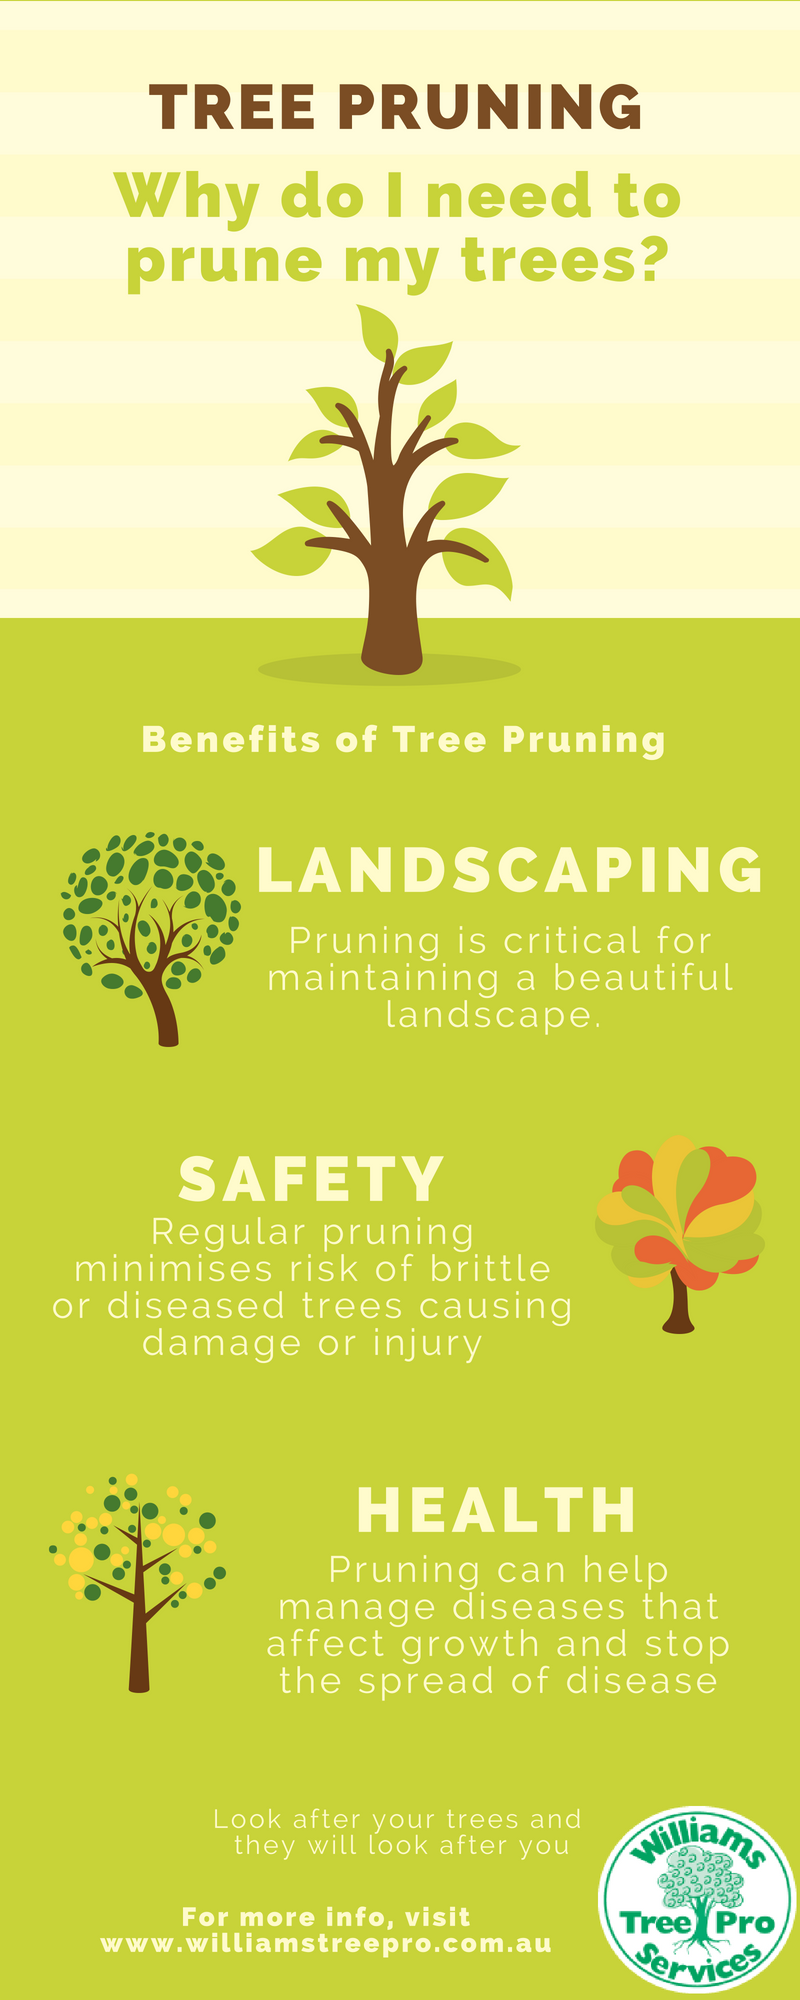 tree pruning infographic - williams tree pro services - benefits of tree pruning